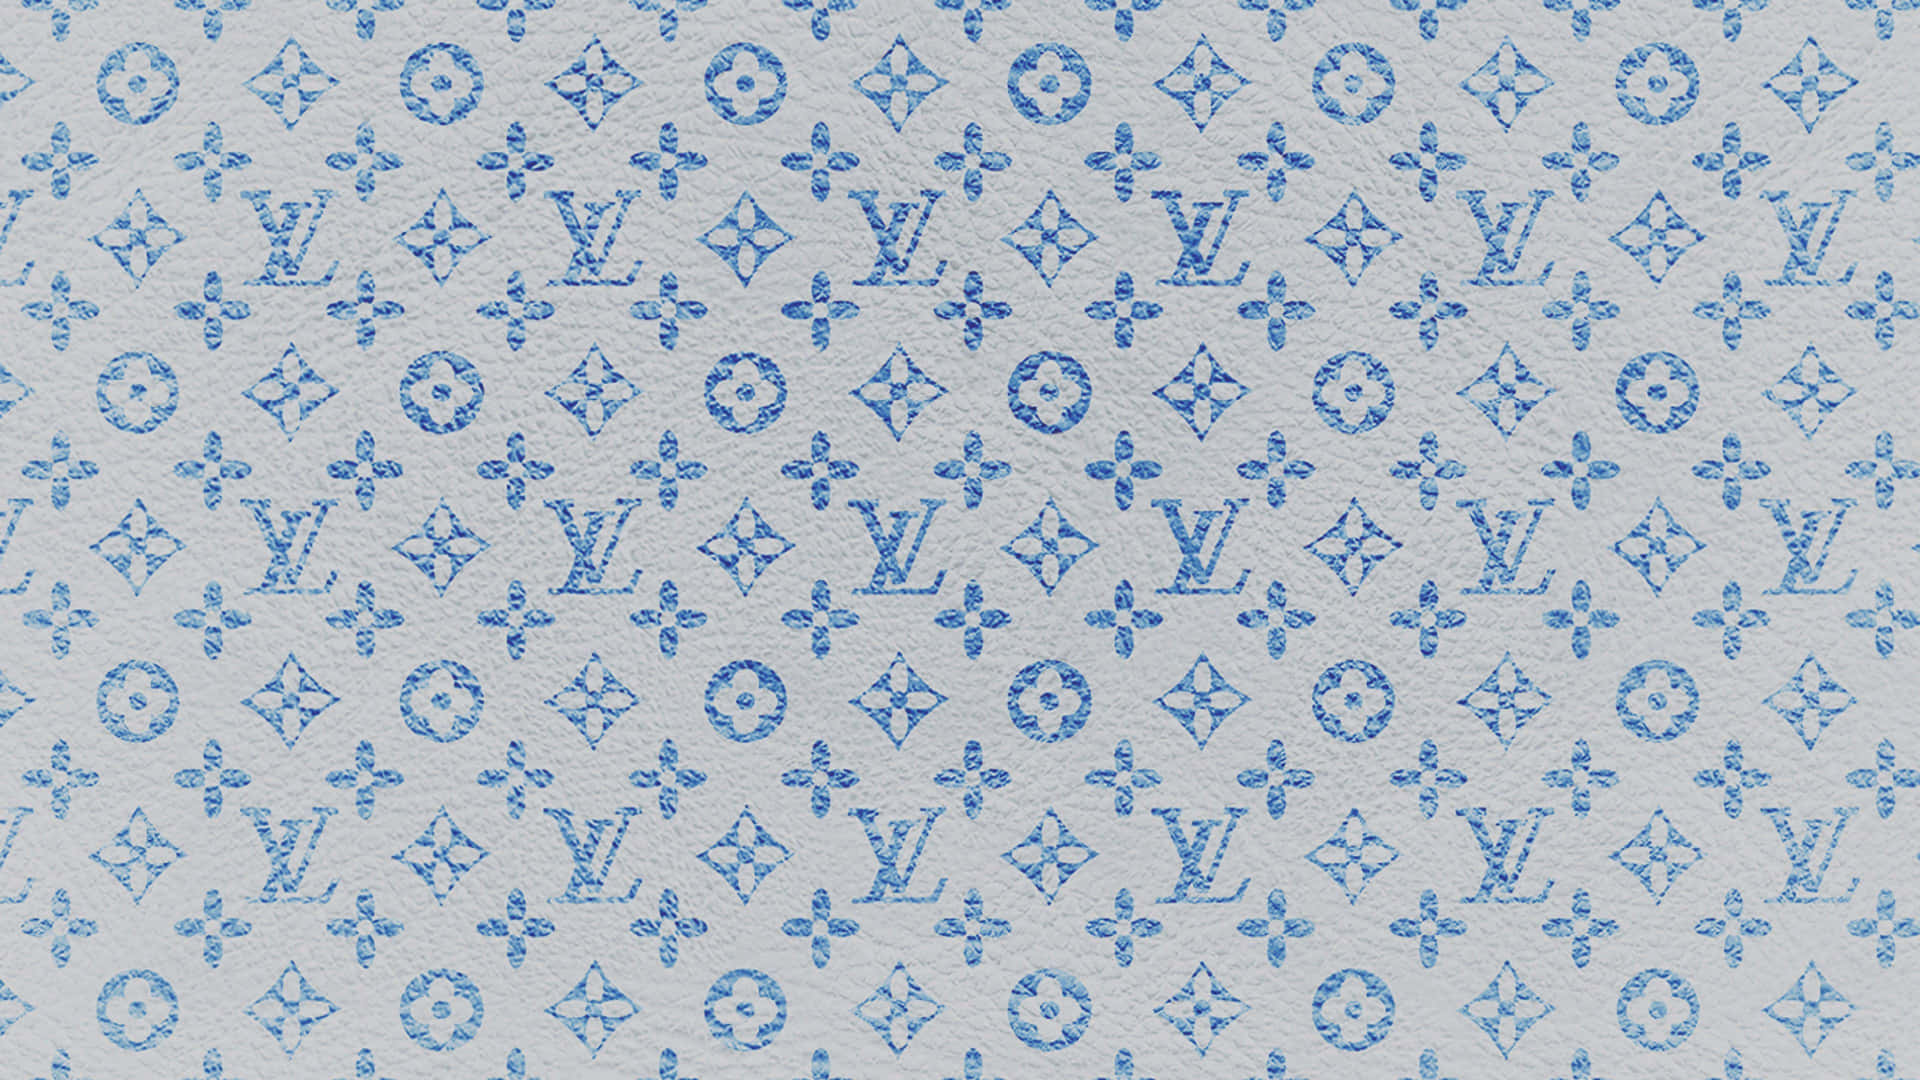 Download Accessorize in Luxury with Louis Vuitton Blue Wallpaper